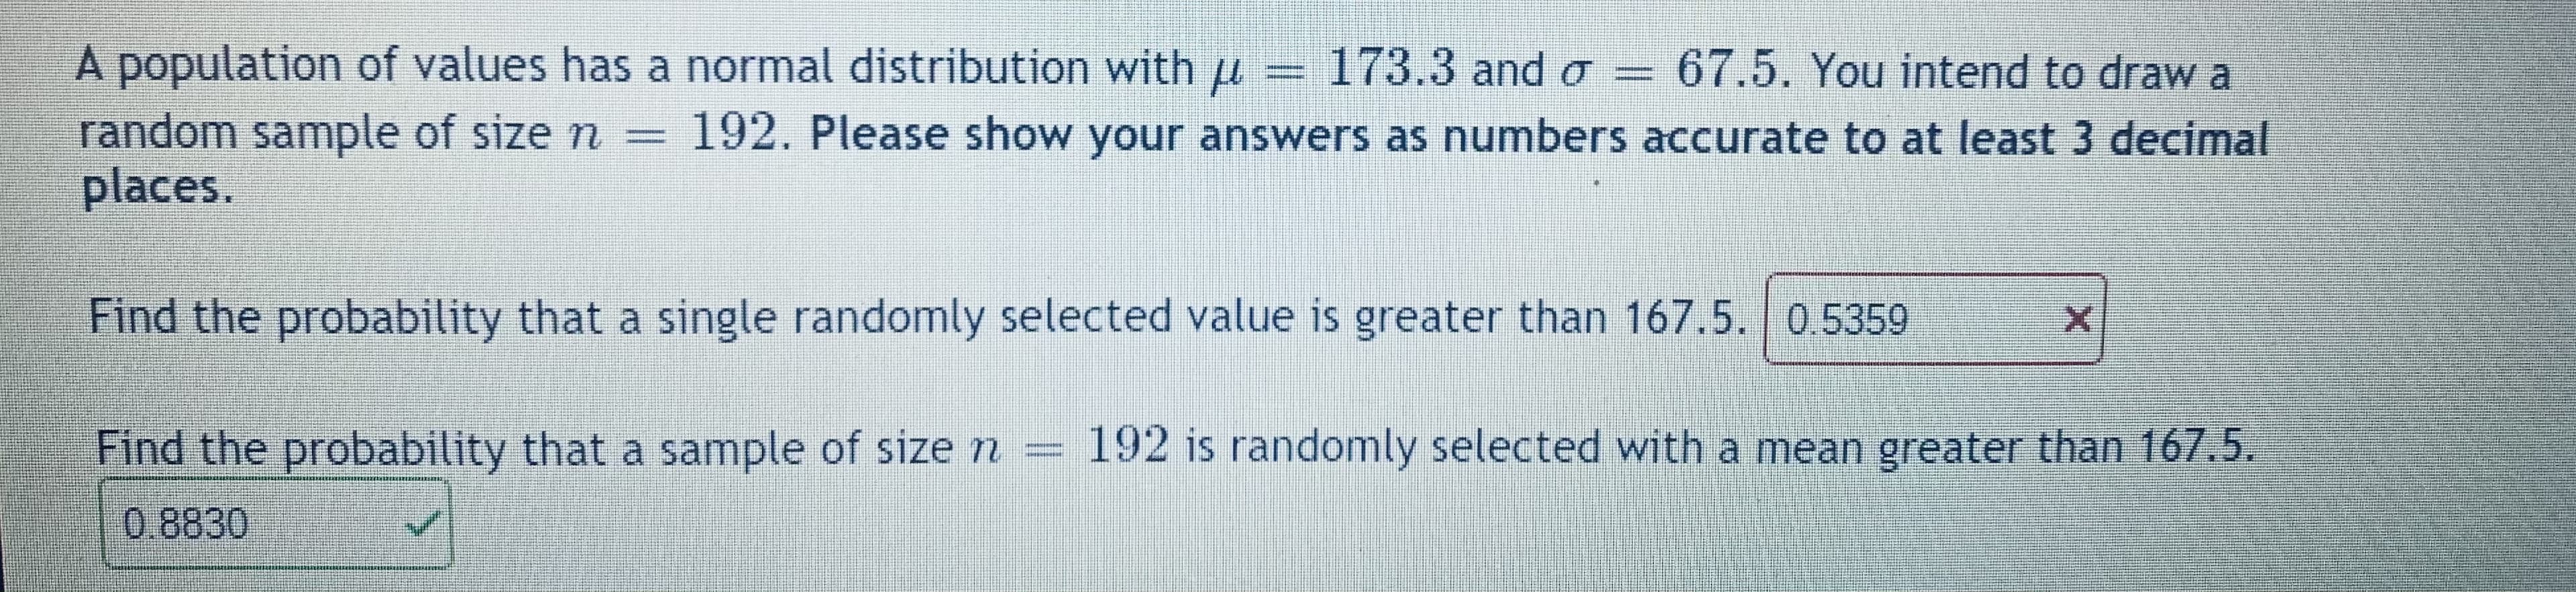 Find the probability that a single randomly selected value is greater than 167.5. 0.5359
